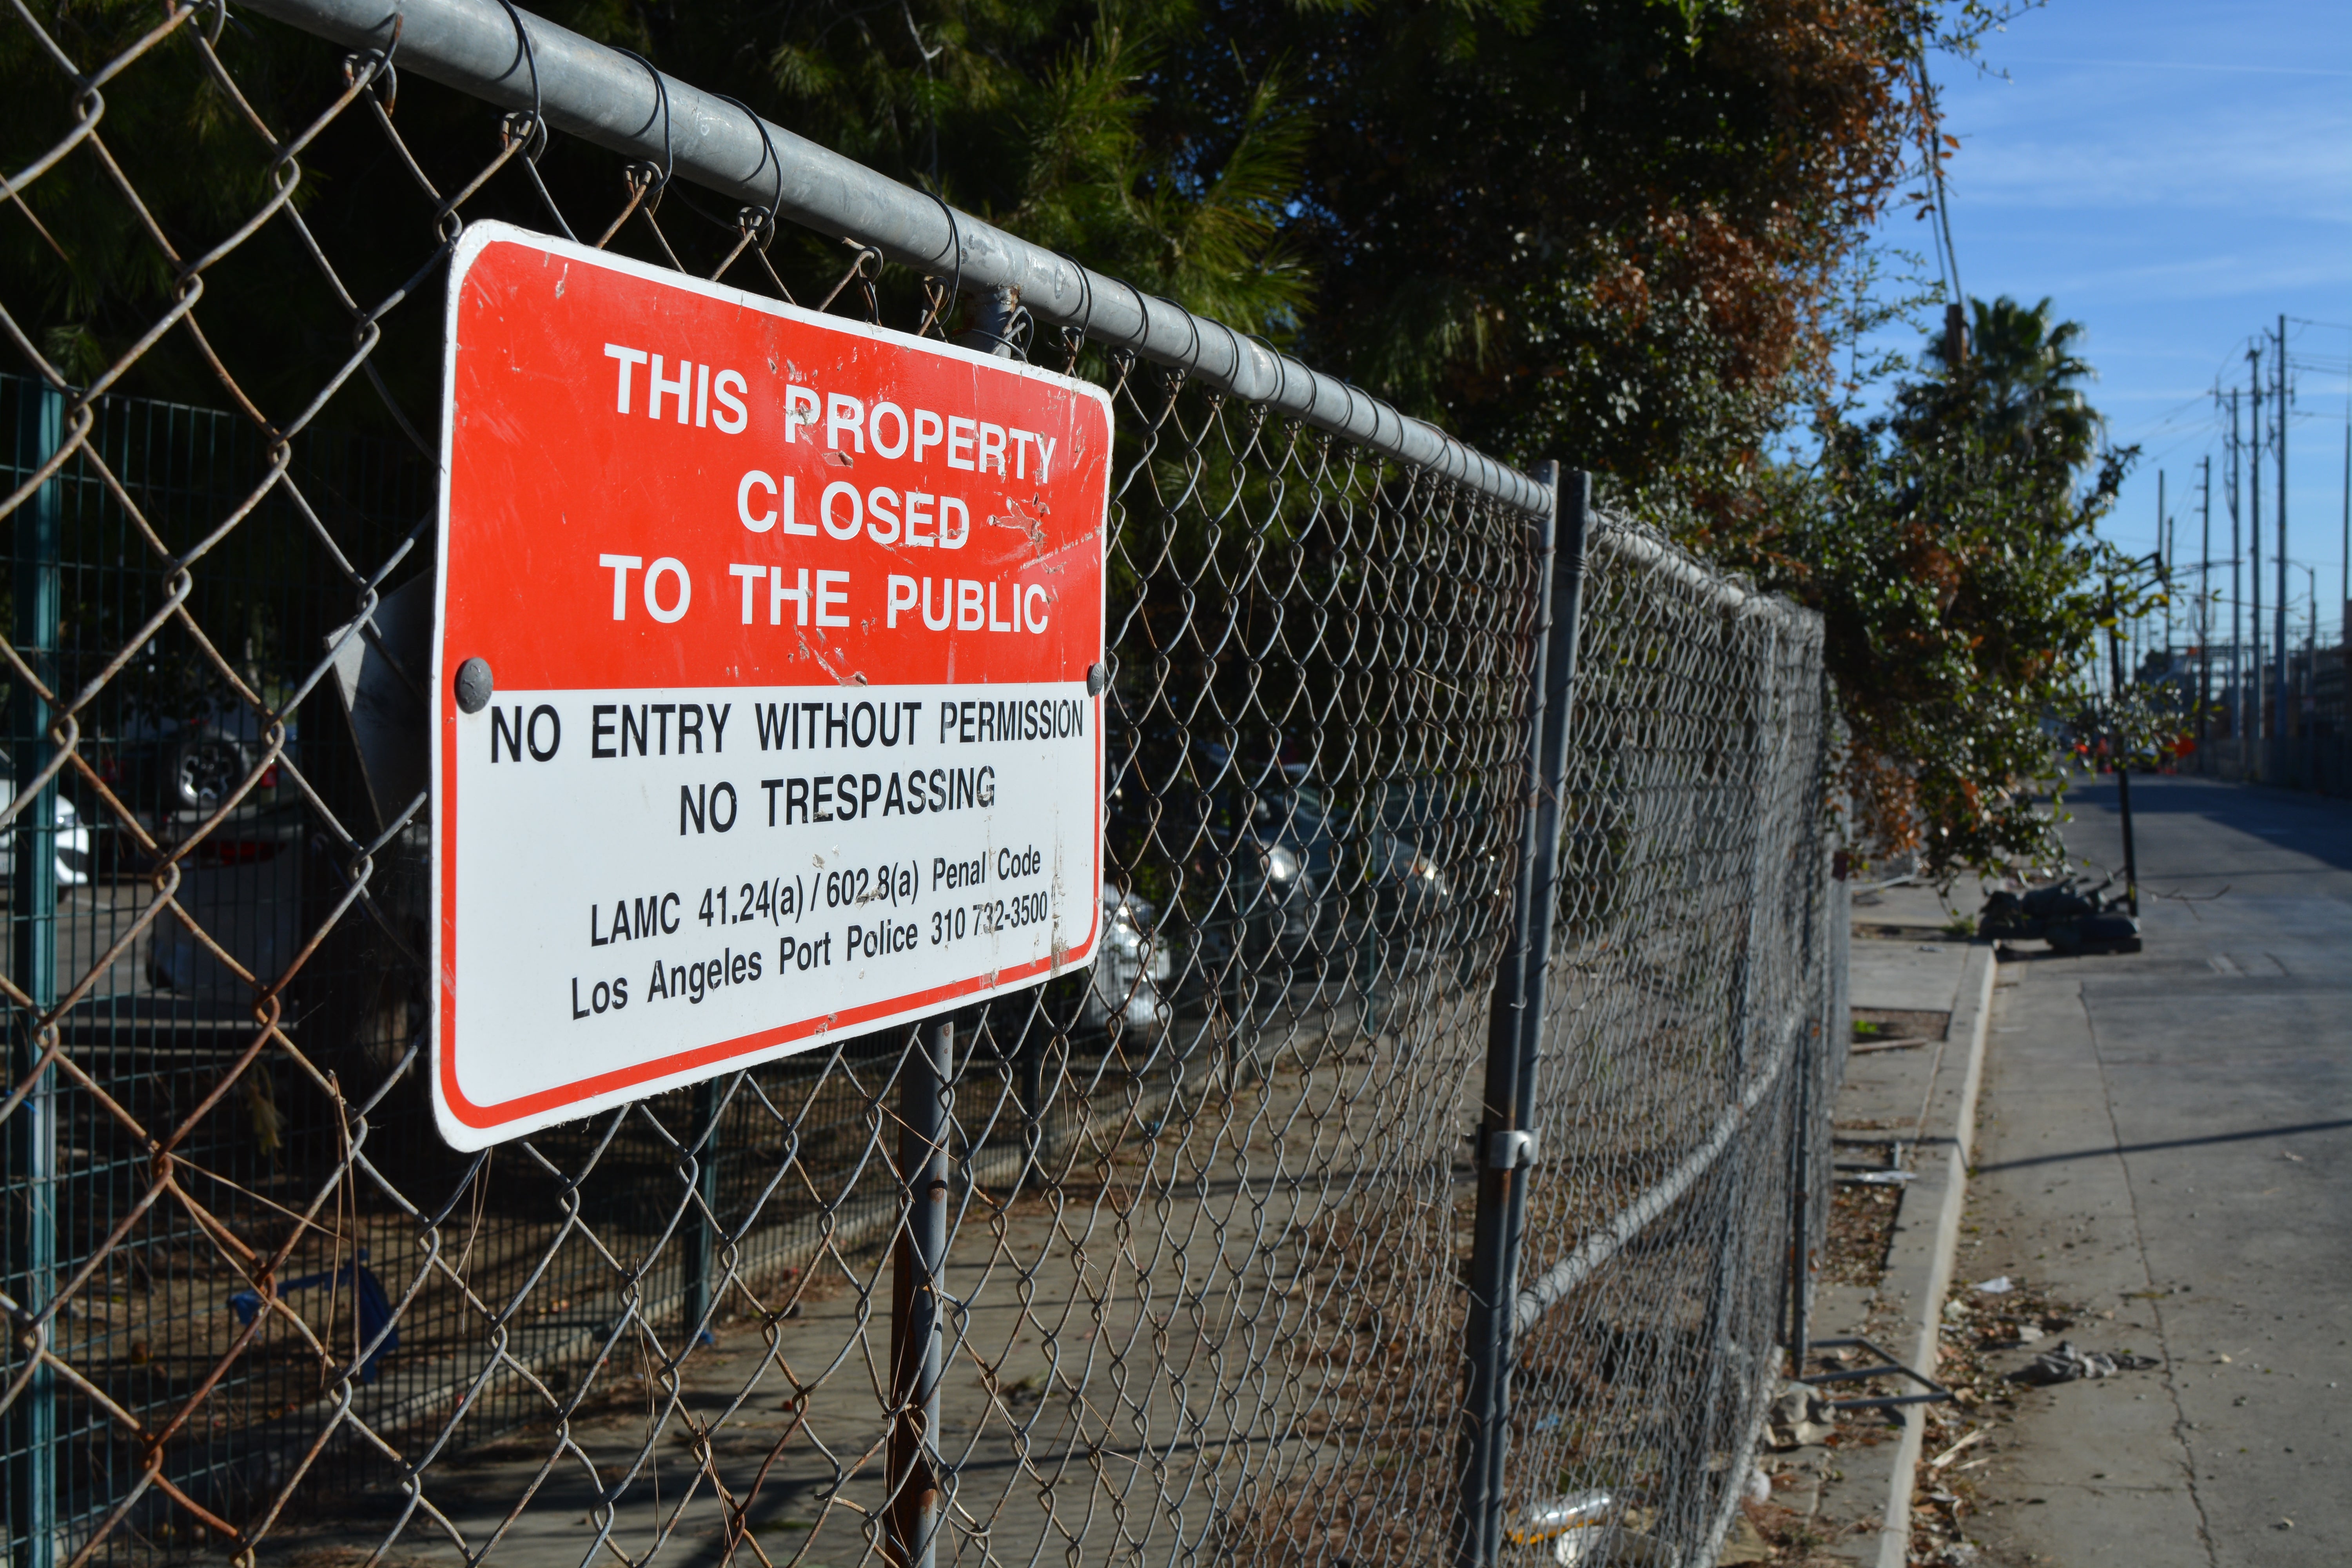 The site of the former Aetna Street homeless encampment is now fenced off